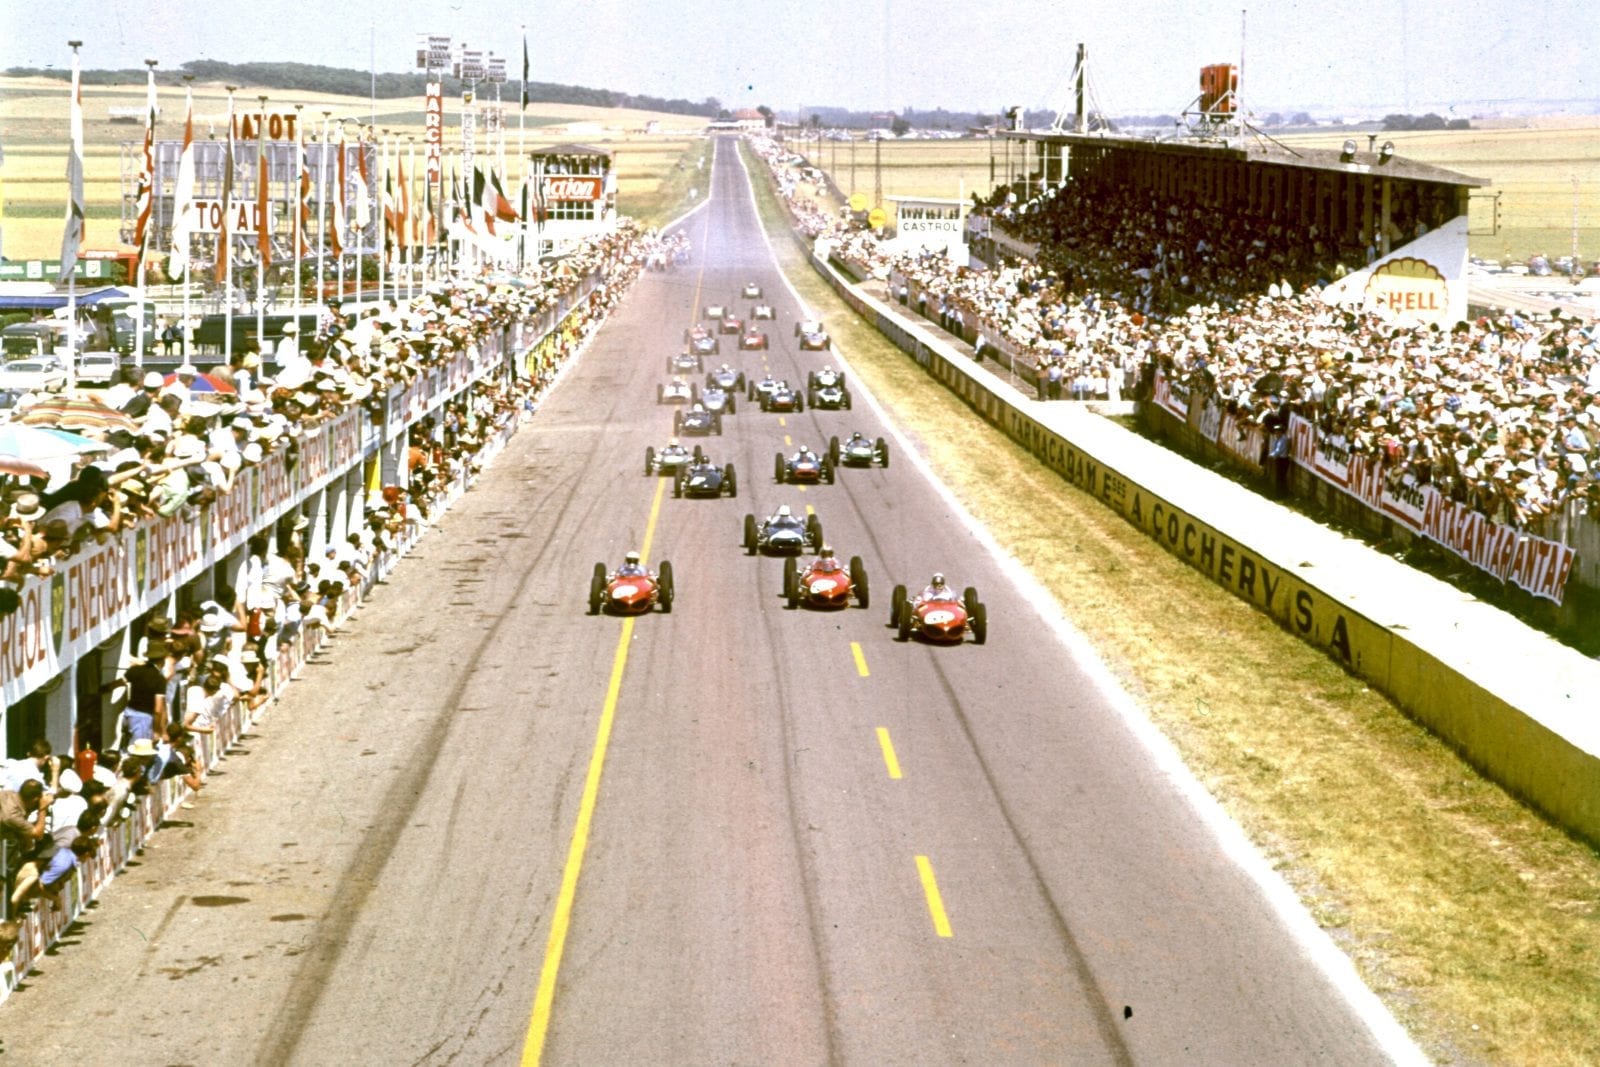 The start of the 1961 French Grand Prix at Reims.